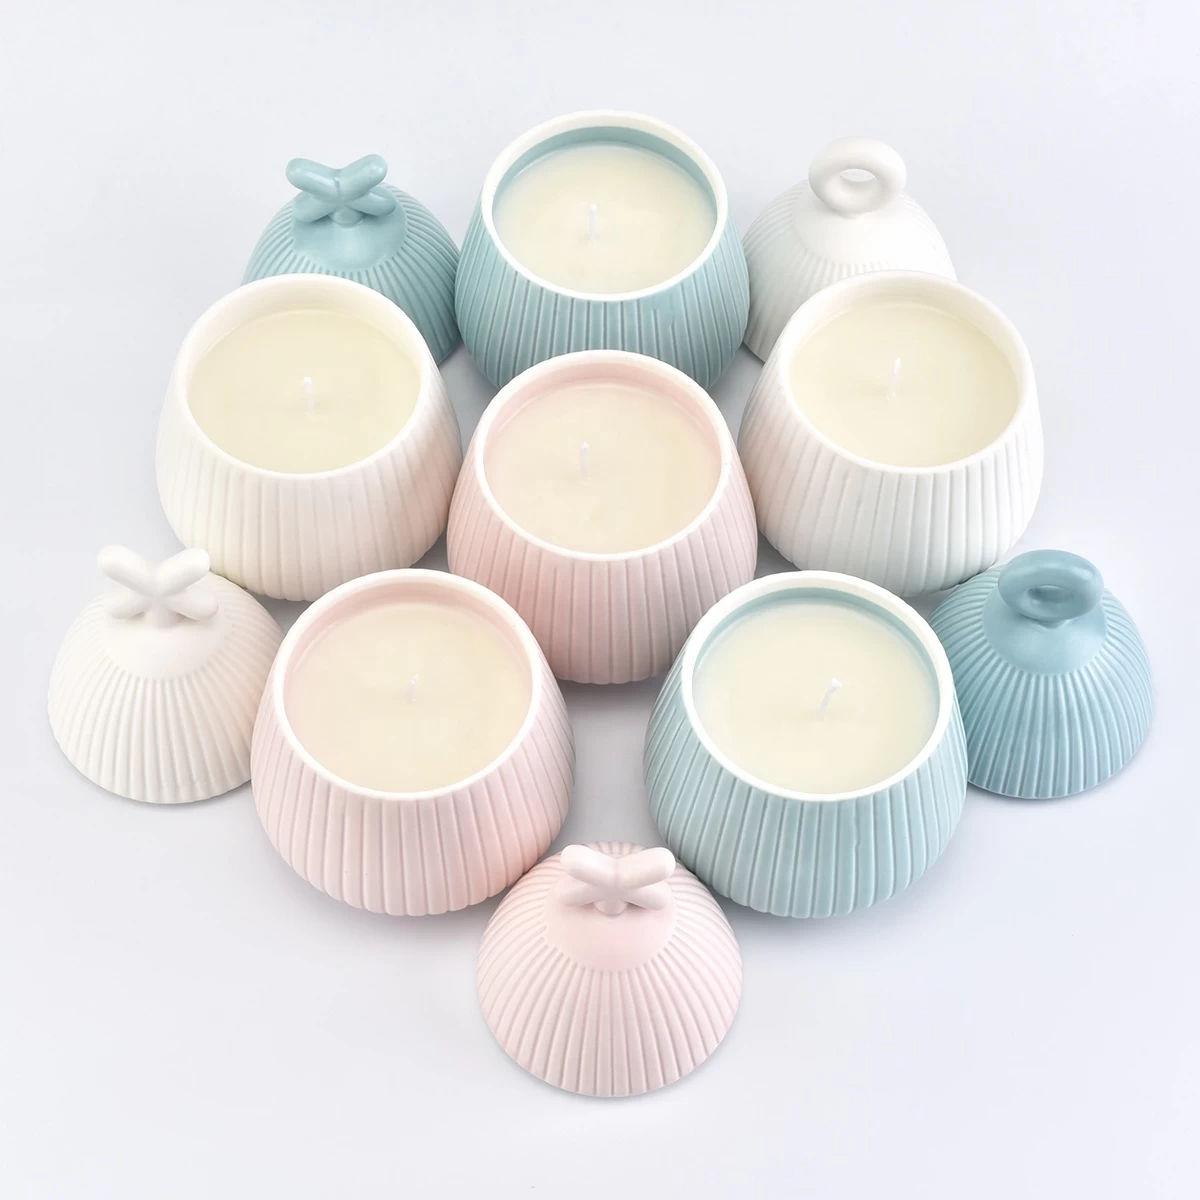 8oz 10oz Popular cute porcelain ceramic candle holders with lid